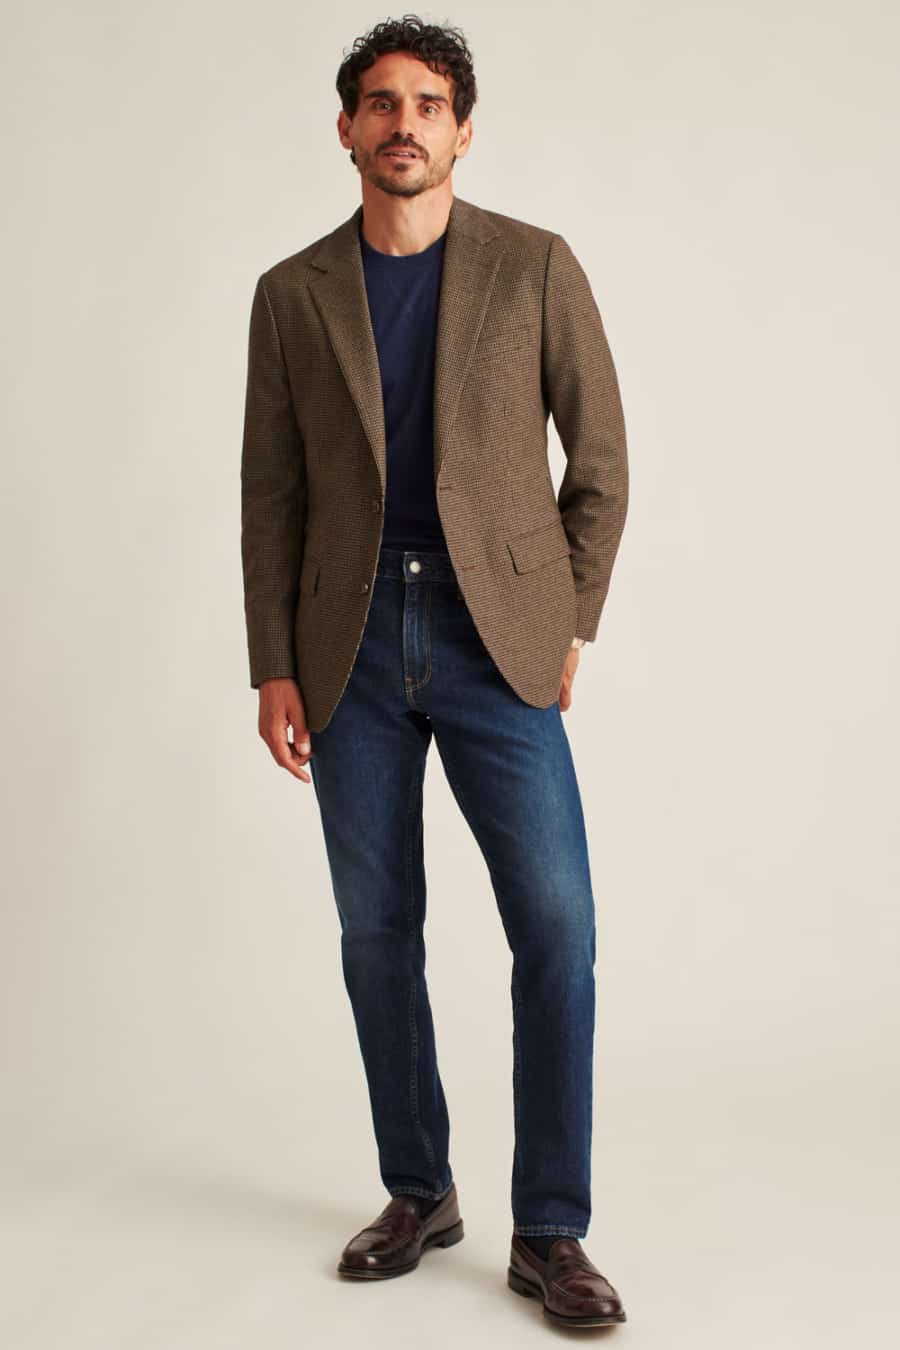 Men's brown wool blazer, tucked in navy T-shirt, mid-wash jeans and loafers outfit